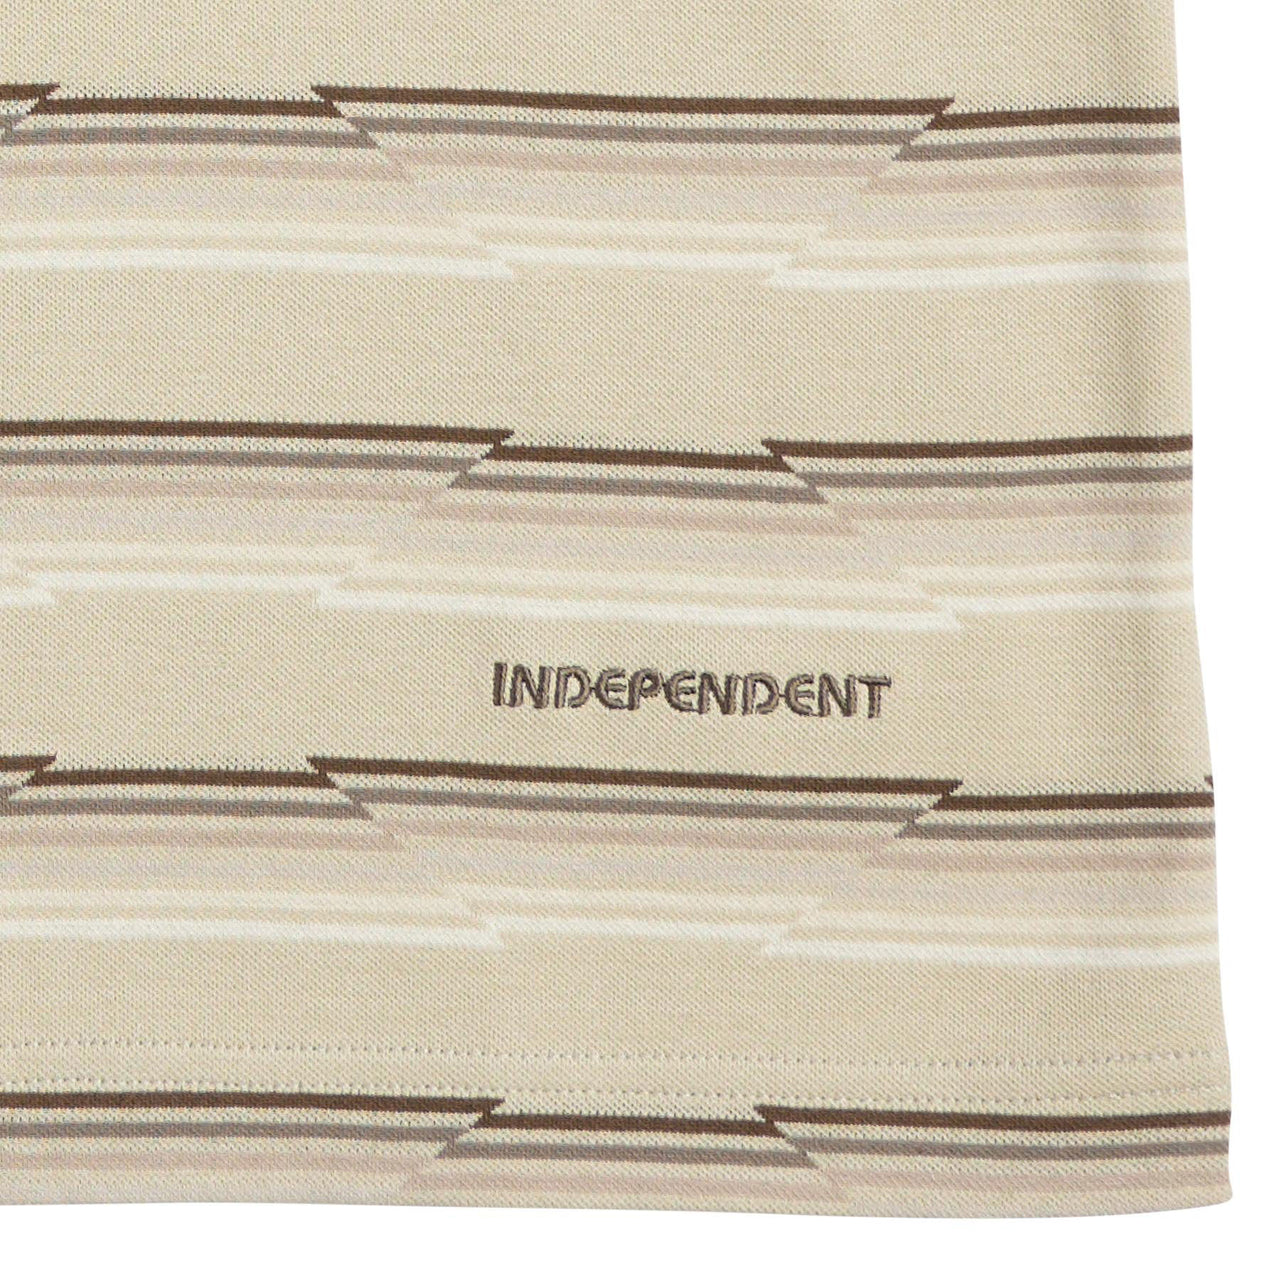 Independent Wired Ringer T-Shirt - Sand Stripe image 3